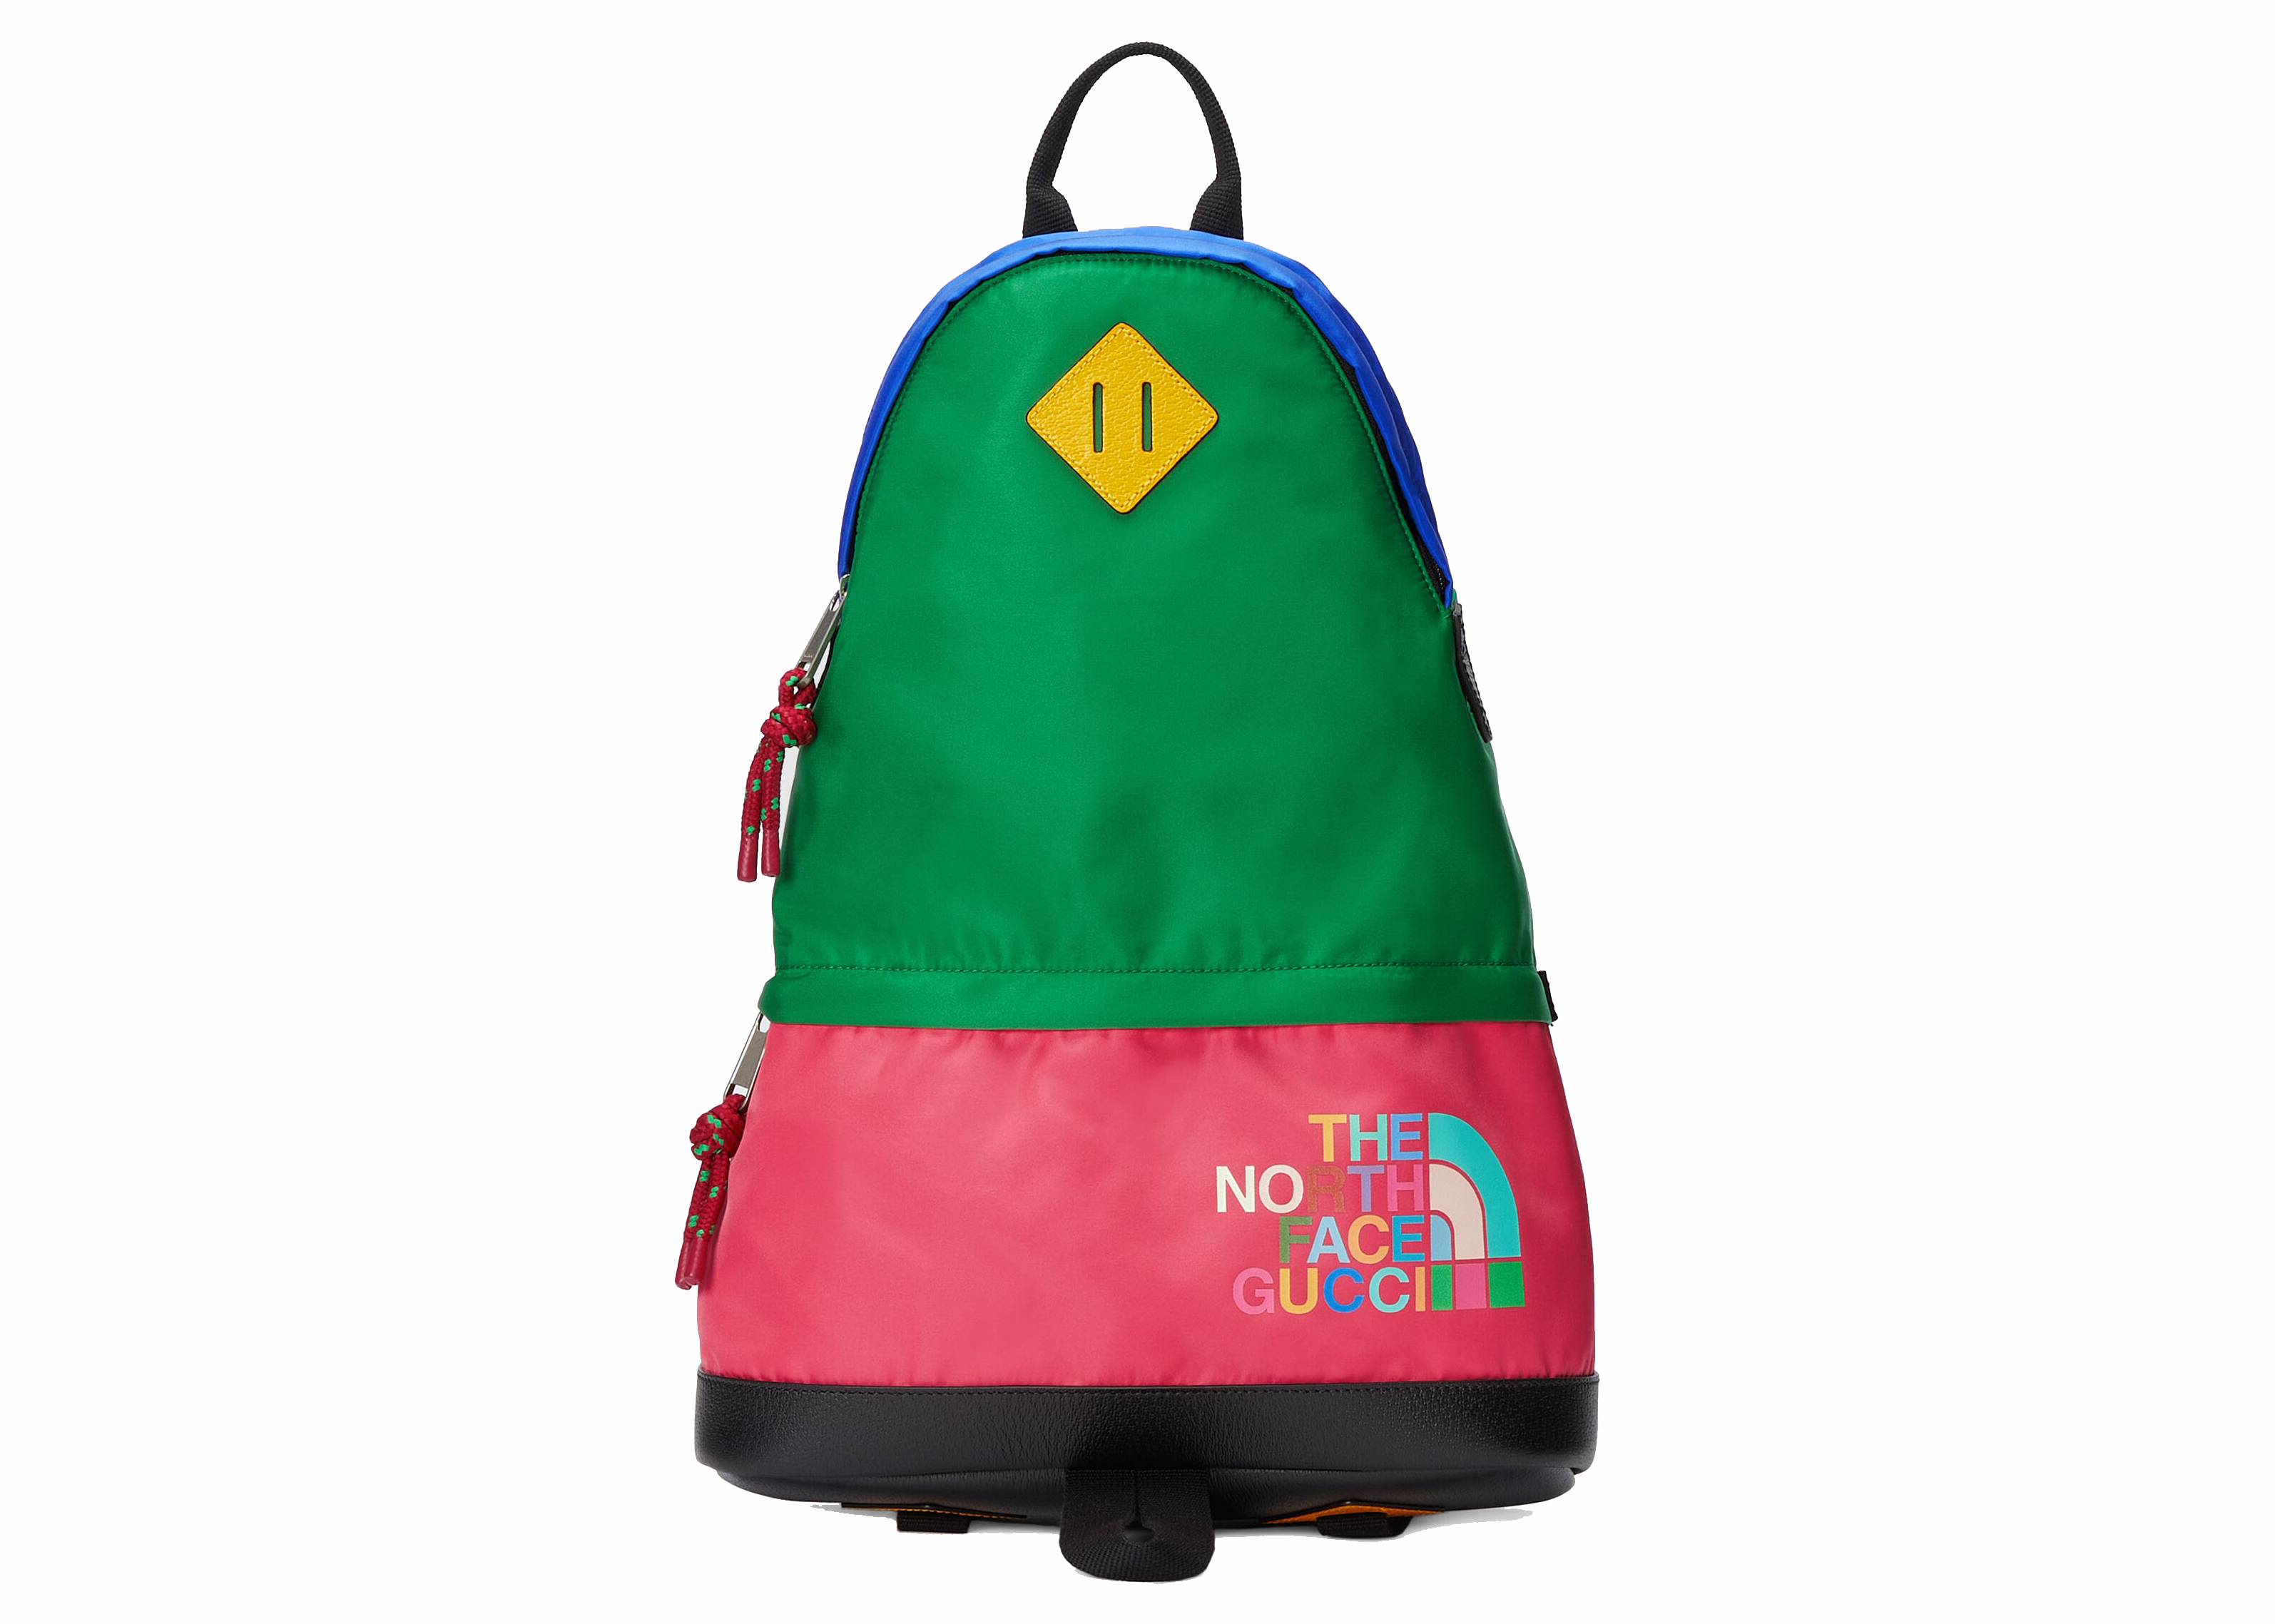 Gucci x The North Face Gucci Backpack Black/Multicolor in Recycled 